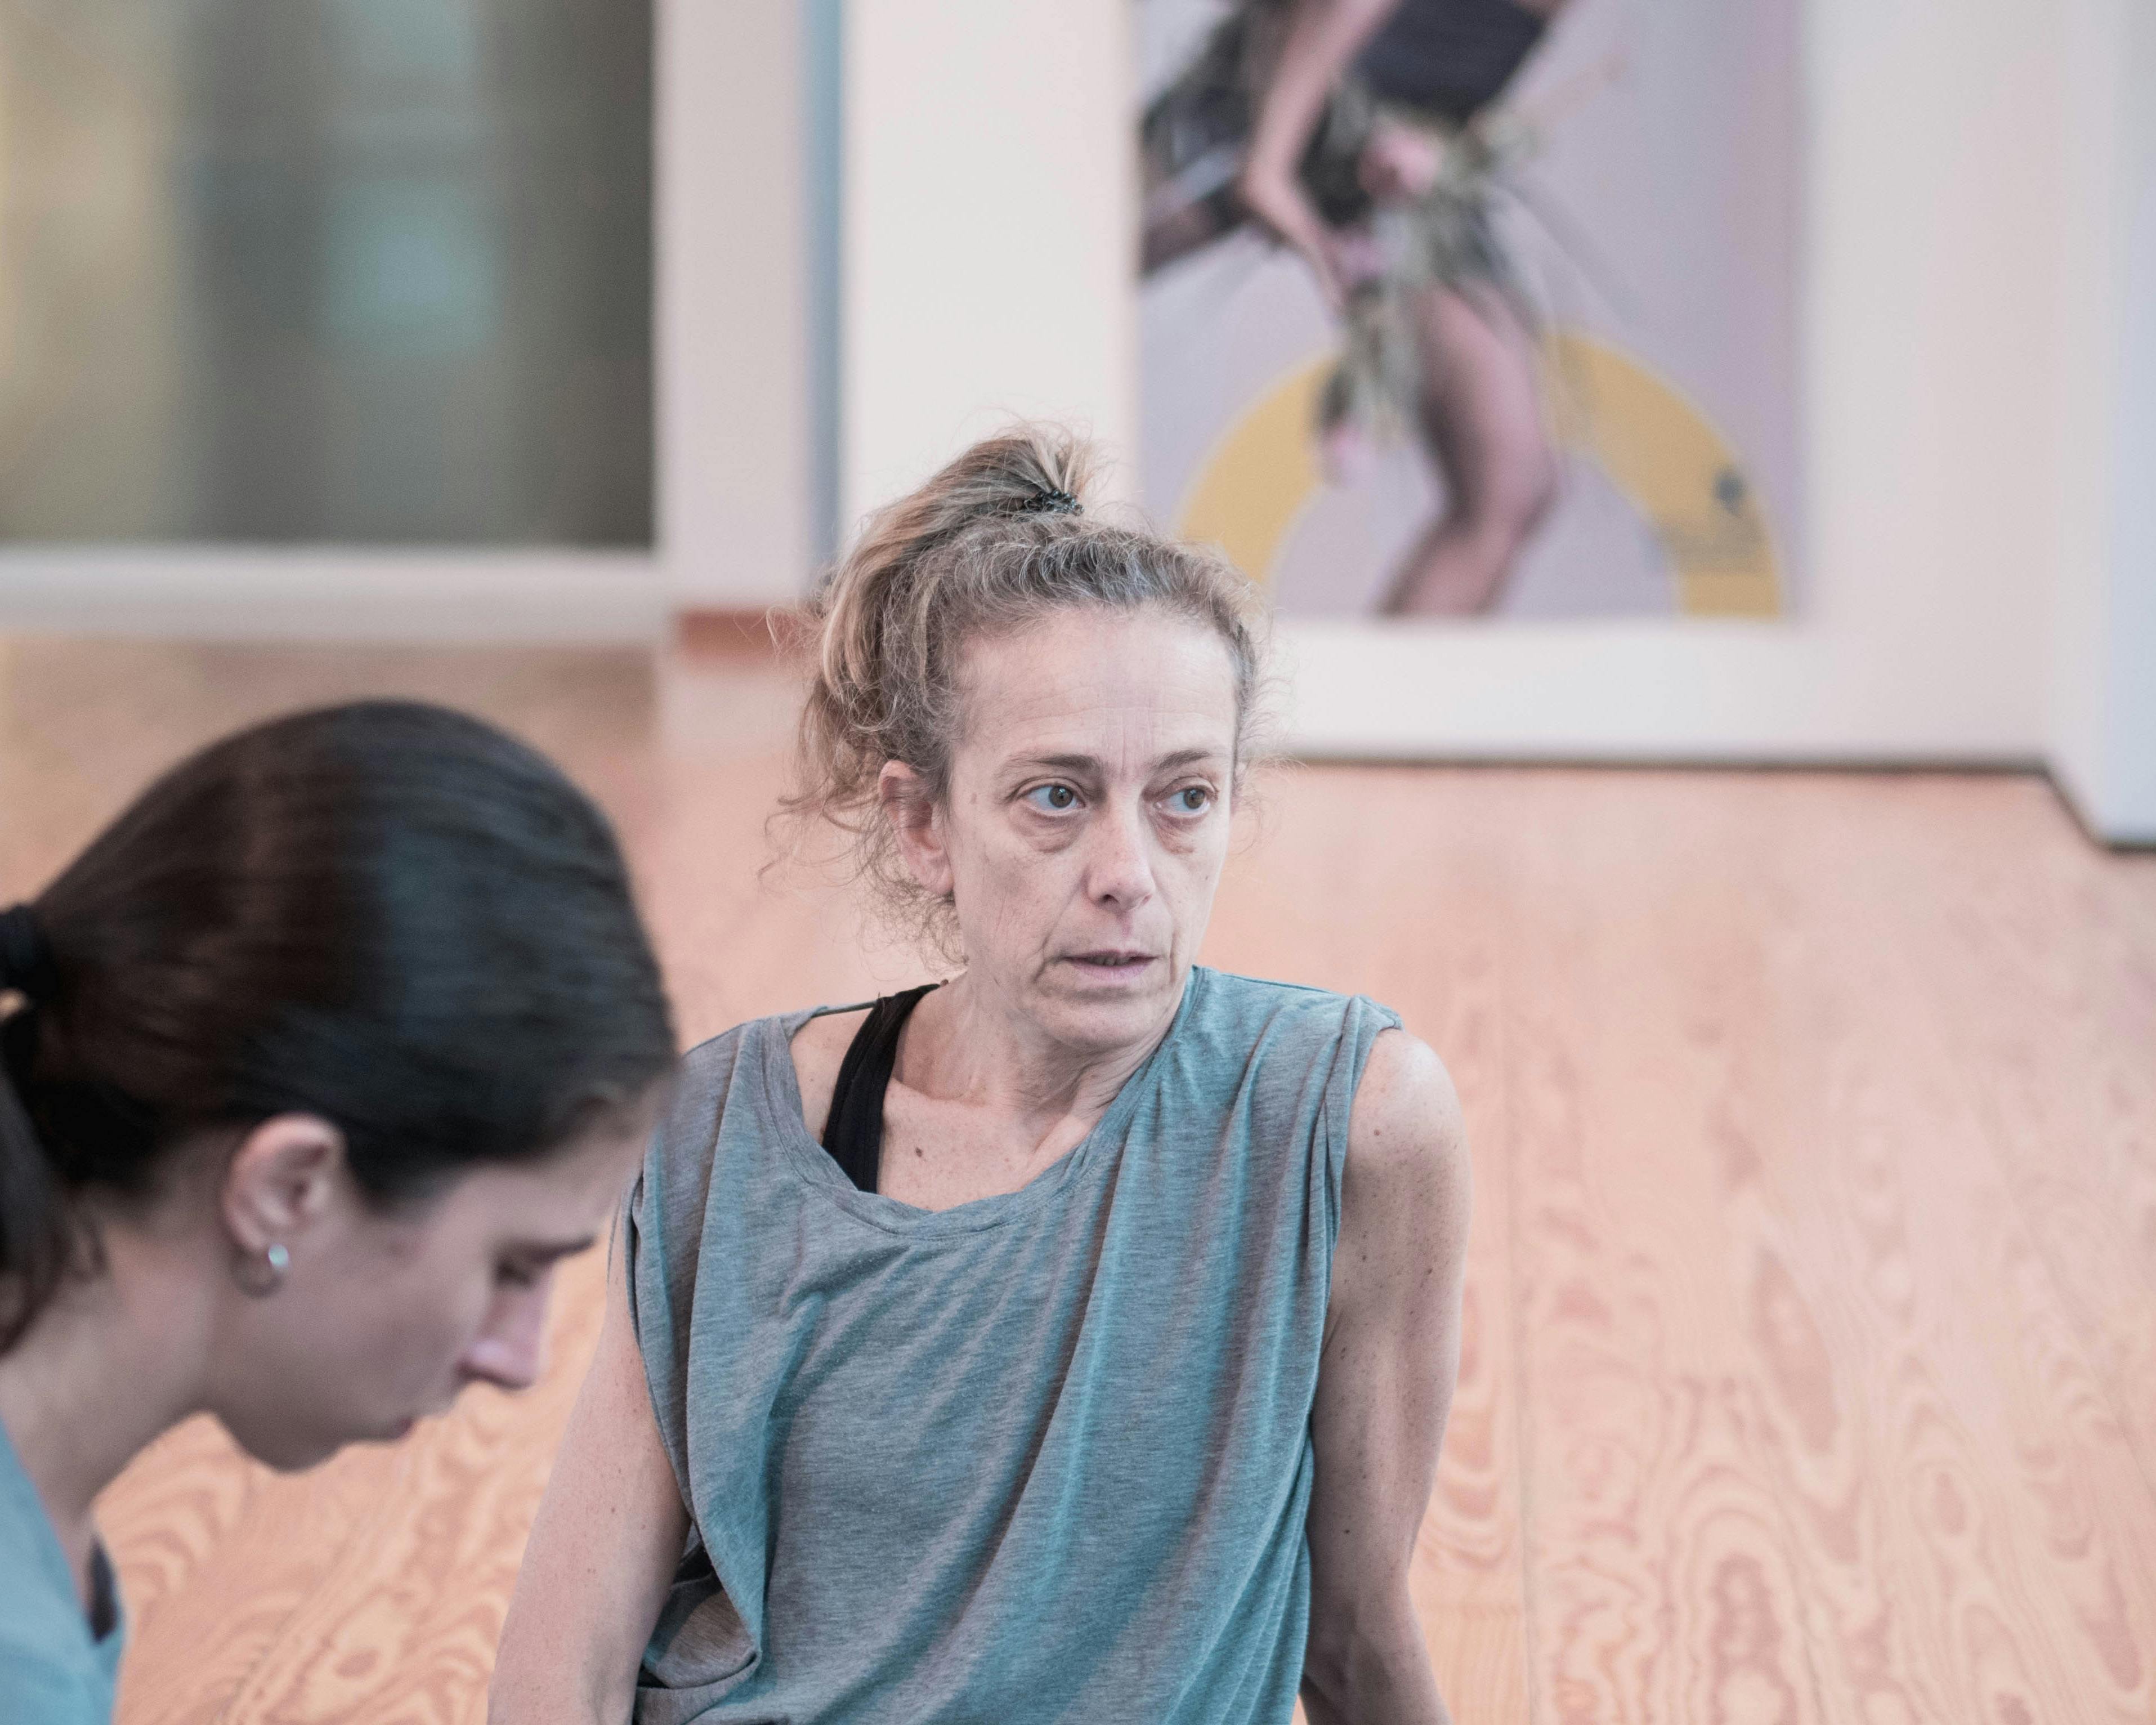 Choreographer Cristina Kristal Rizzo at work in the Studio talking with the dancers. Next to her a dancer listens.